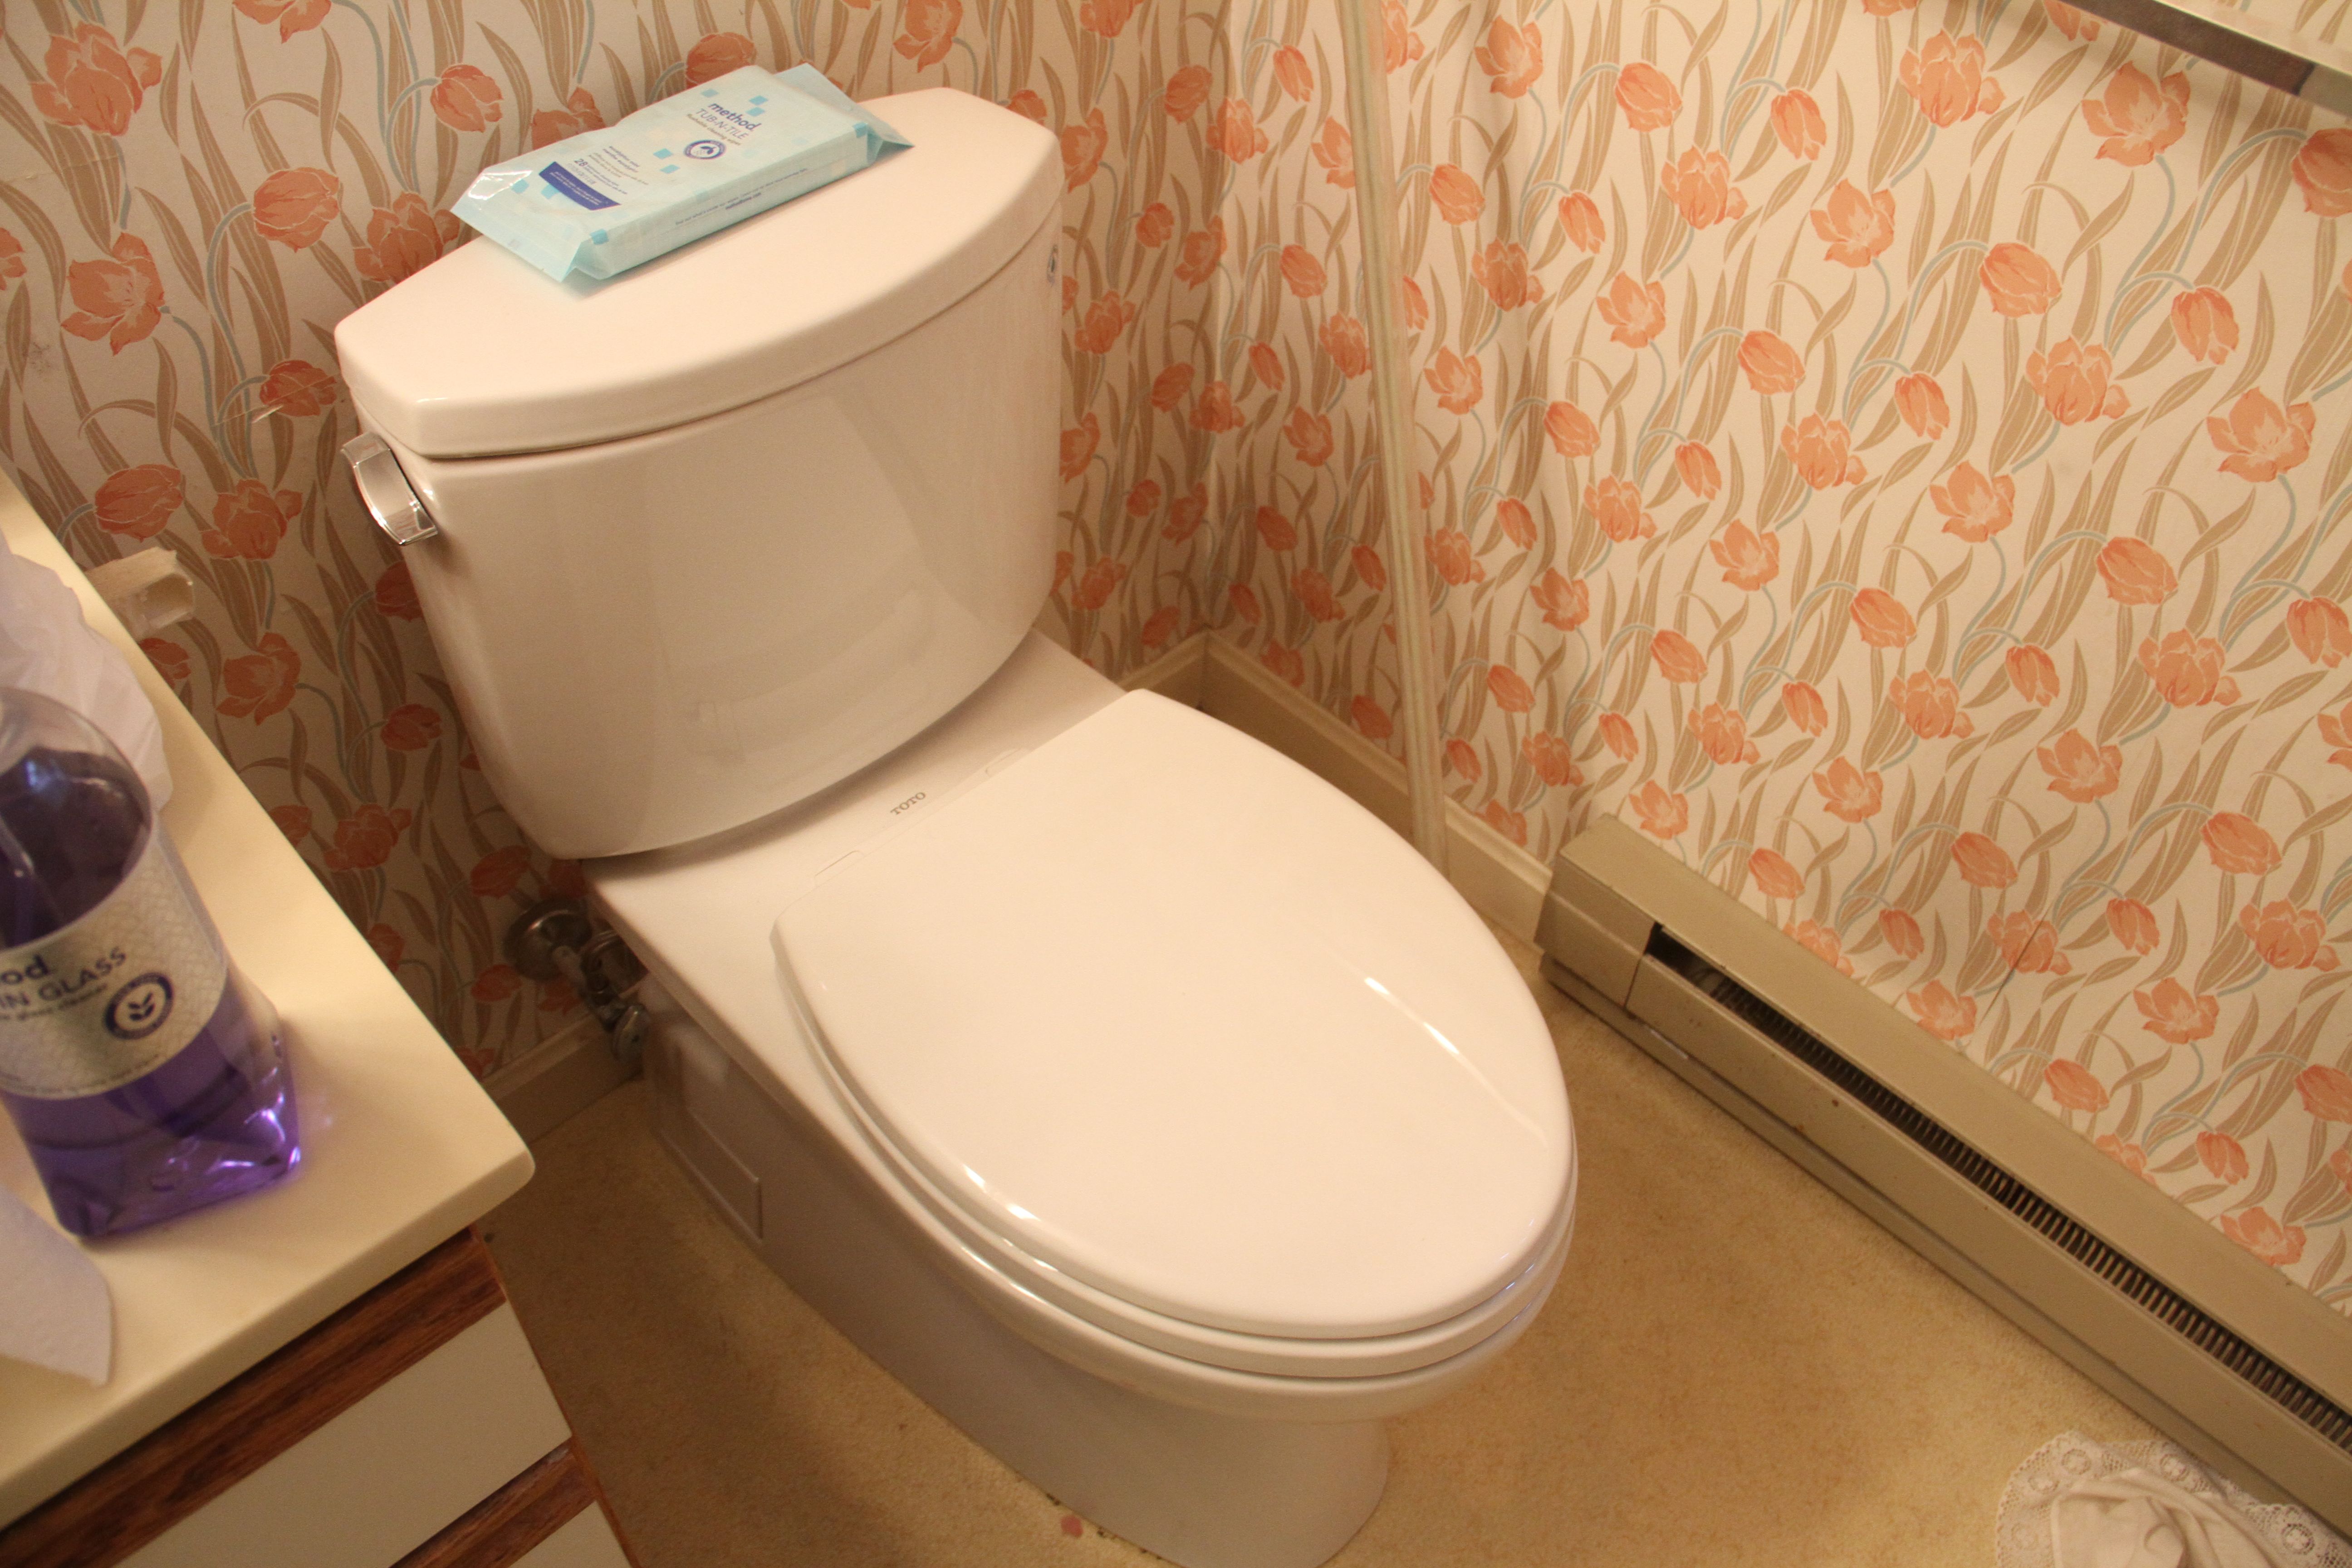 Did I ever show you pictures of the toilet that Jeff installed? Tah-dah!